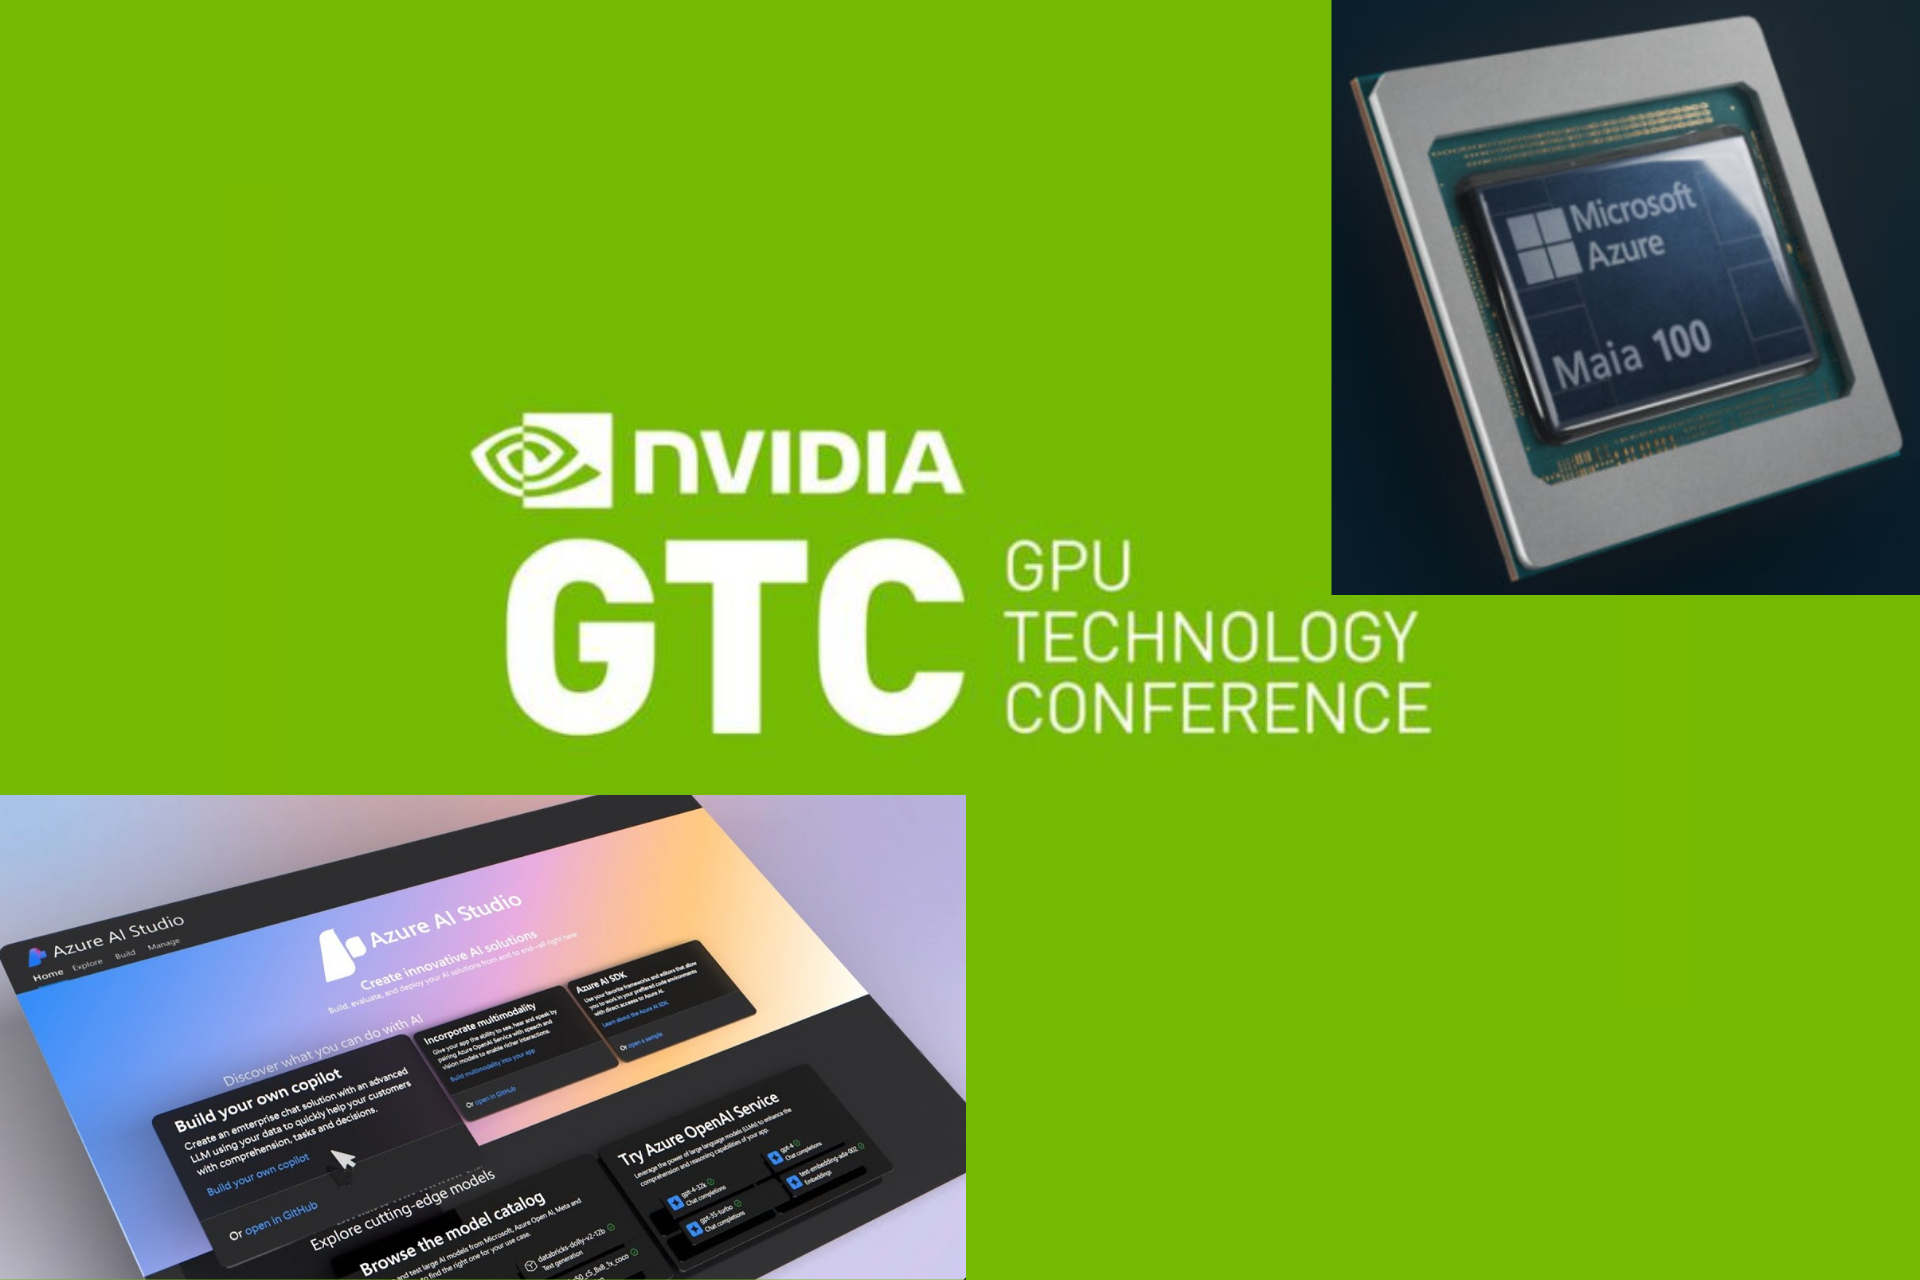 Microsoft shows off their AI business infrastructure at NVIDIA GTC